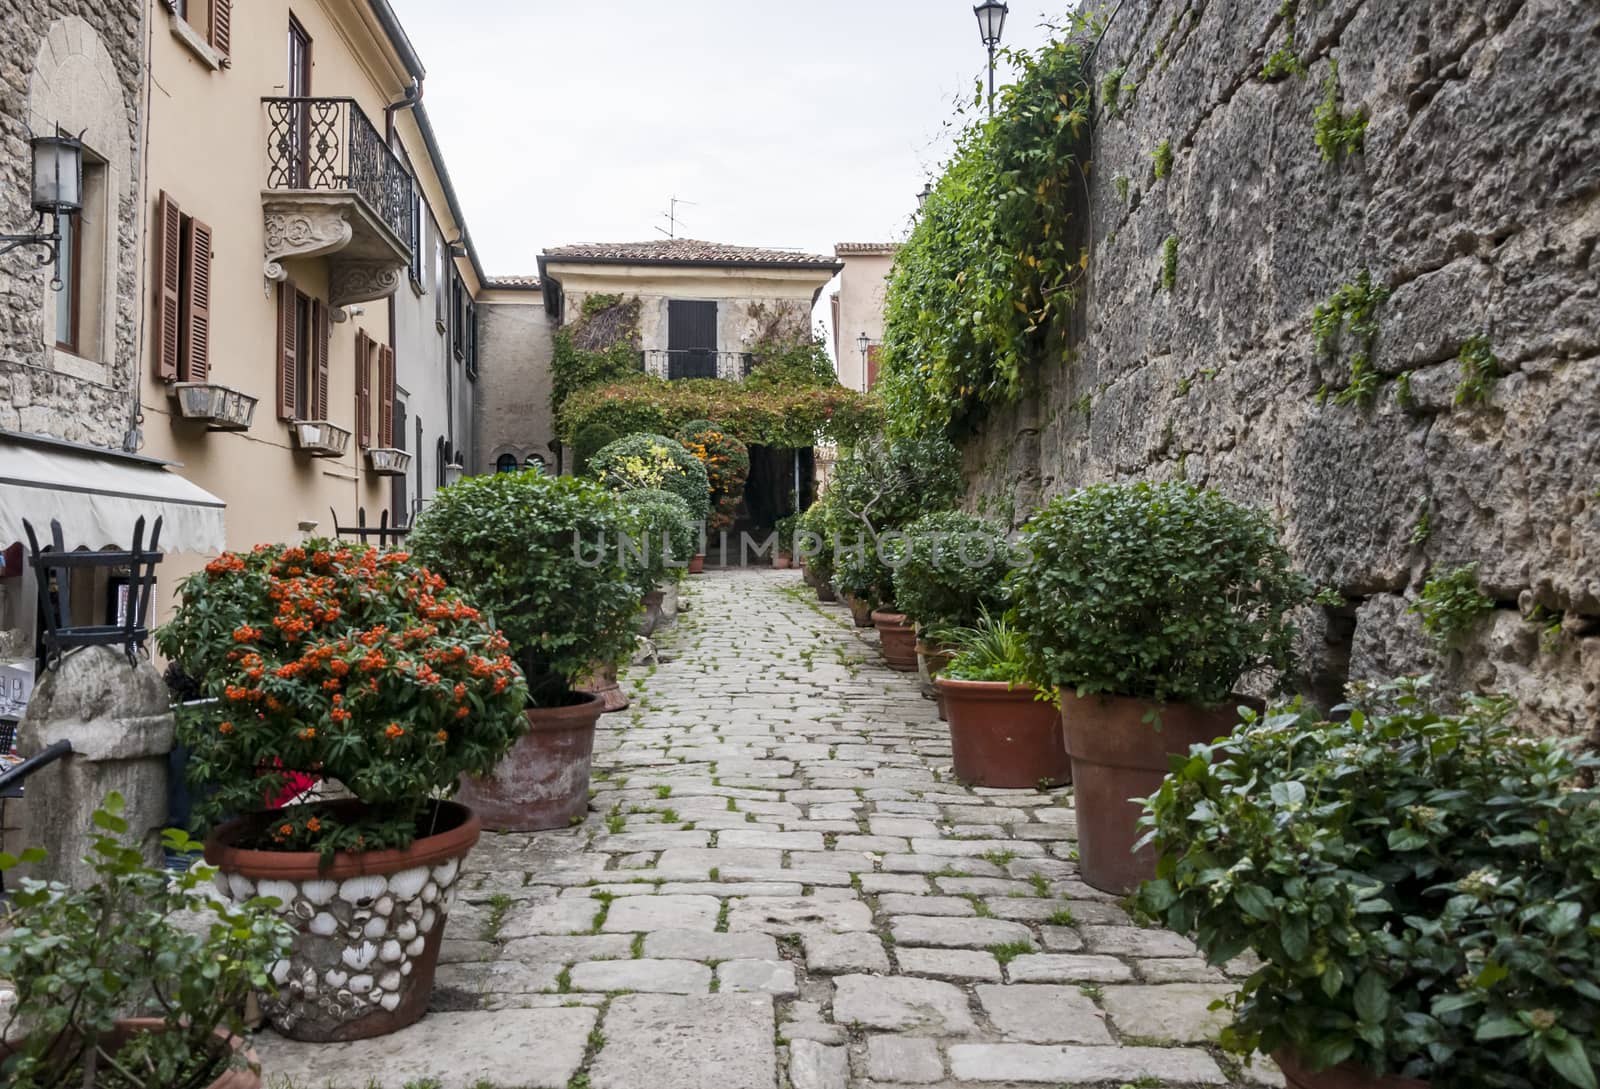 Typical stone street with plants and flowers in San Marino